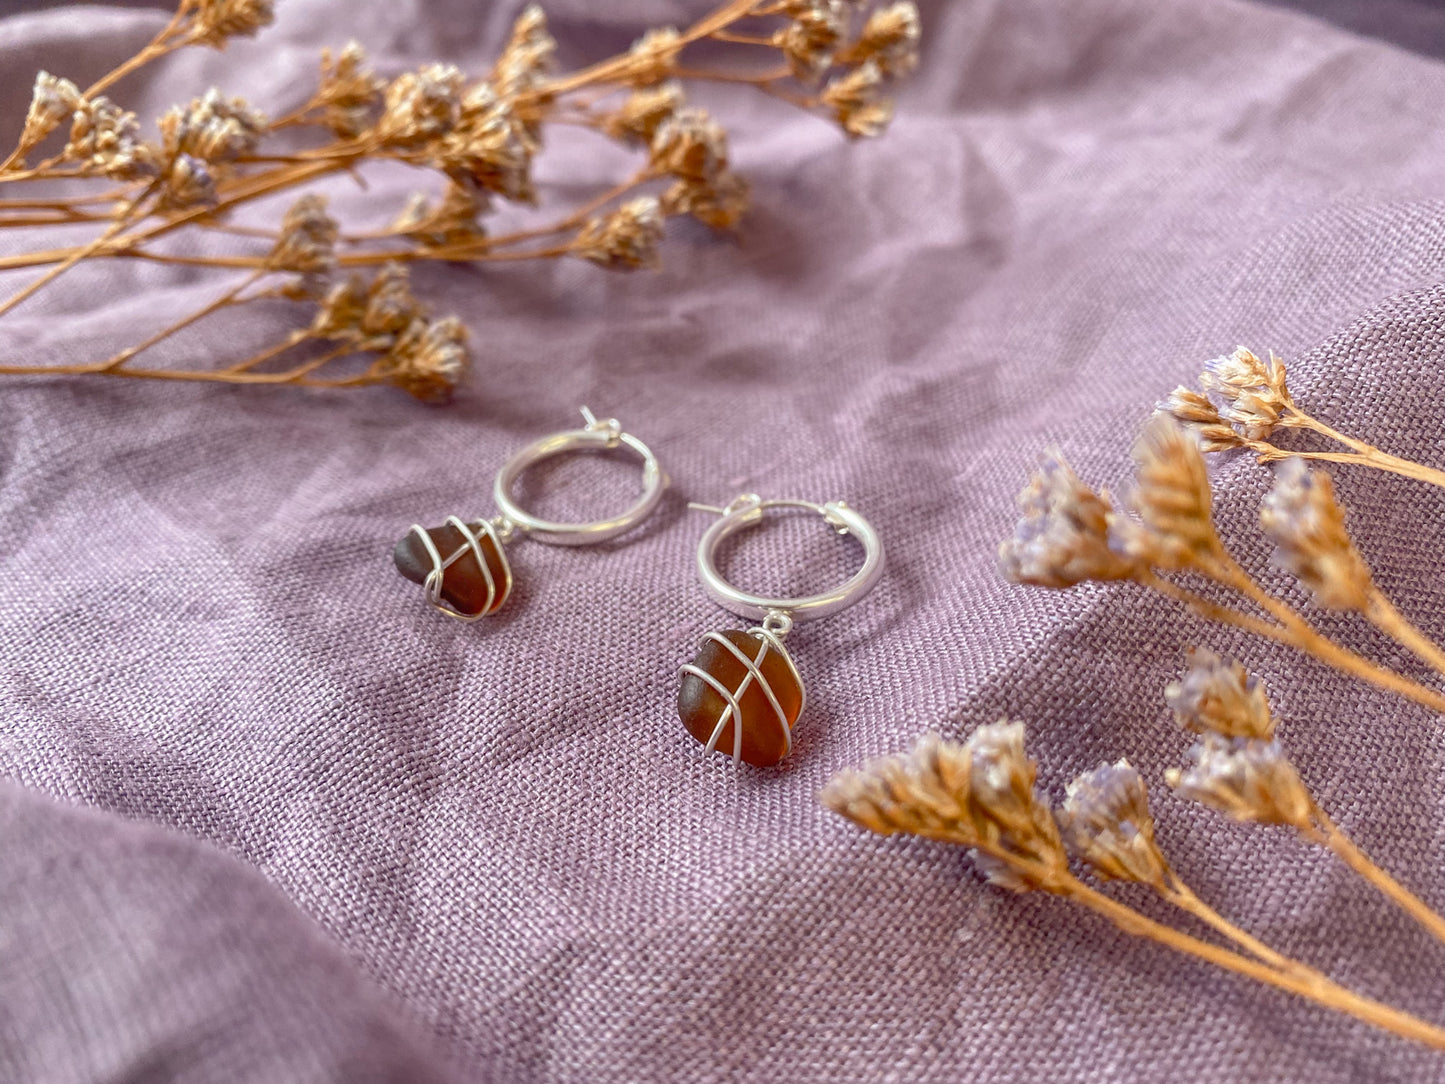 Leone Hoops in Sterling Silver & Amber